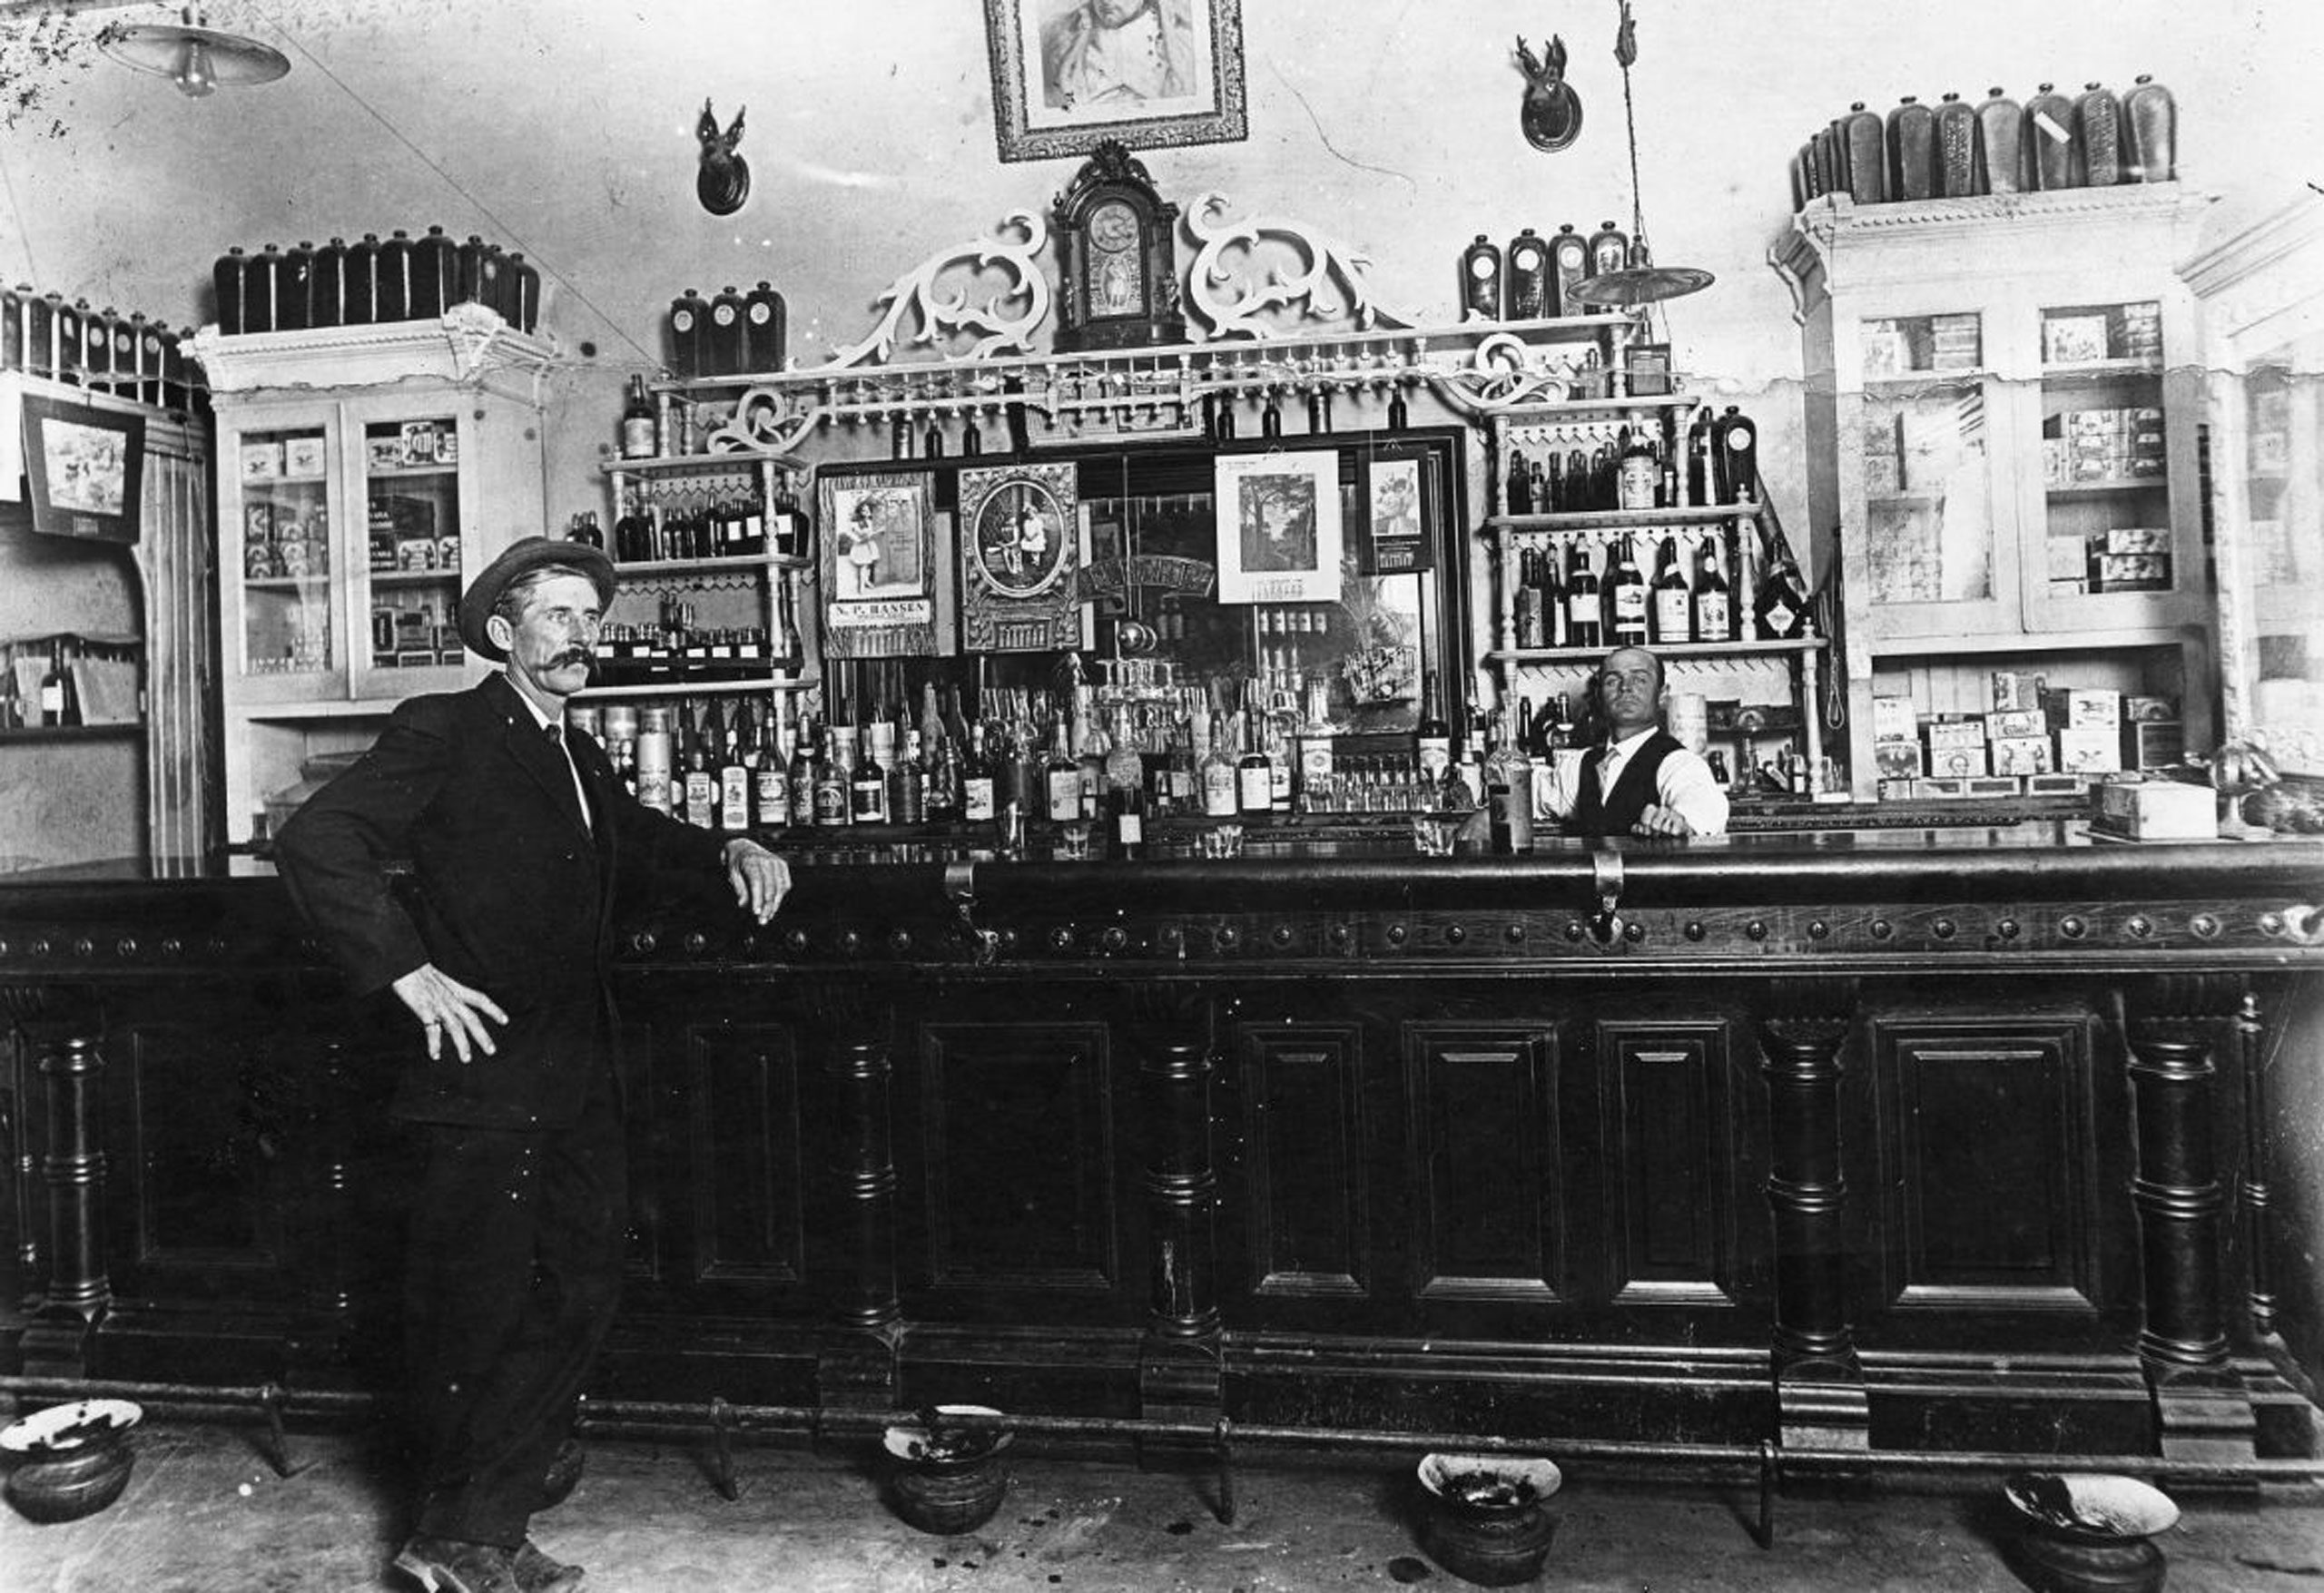 saloon with bar tender and patron